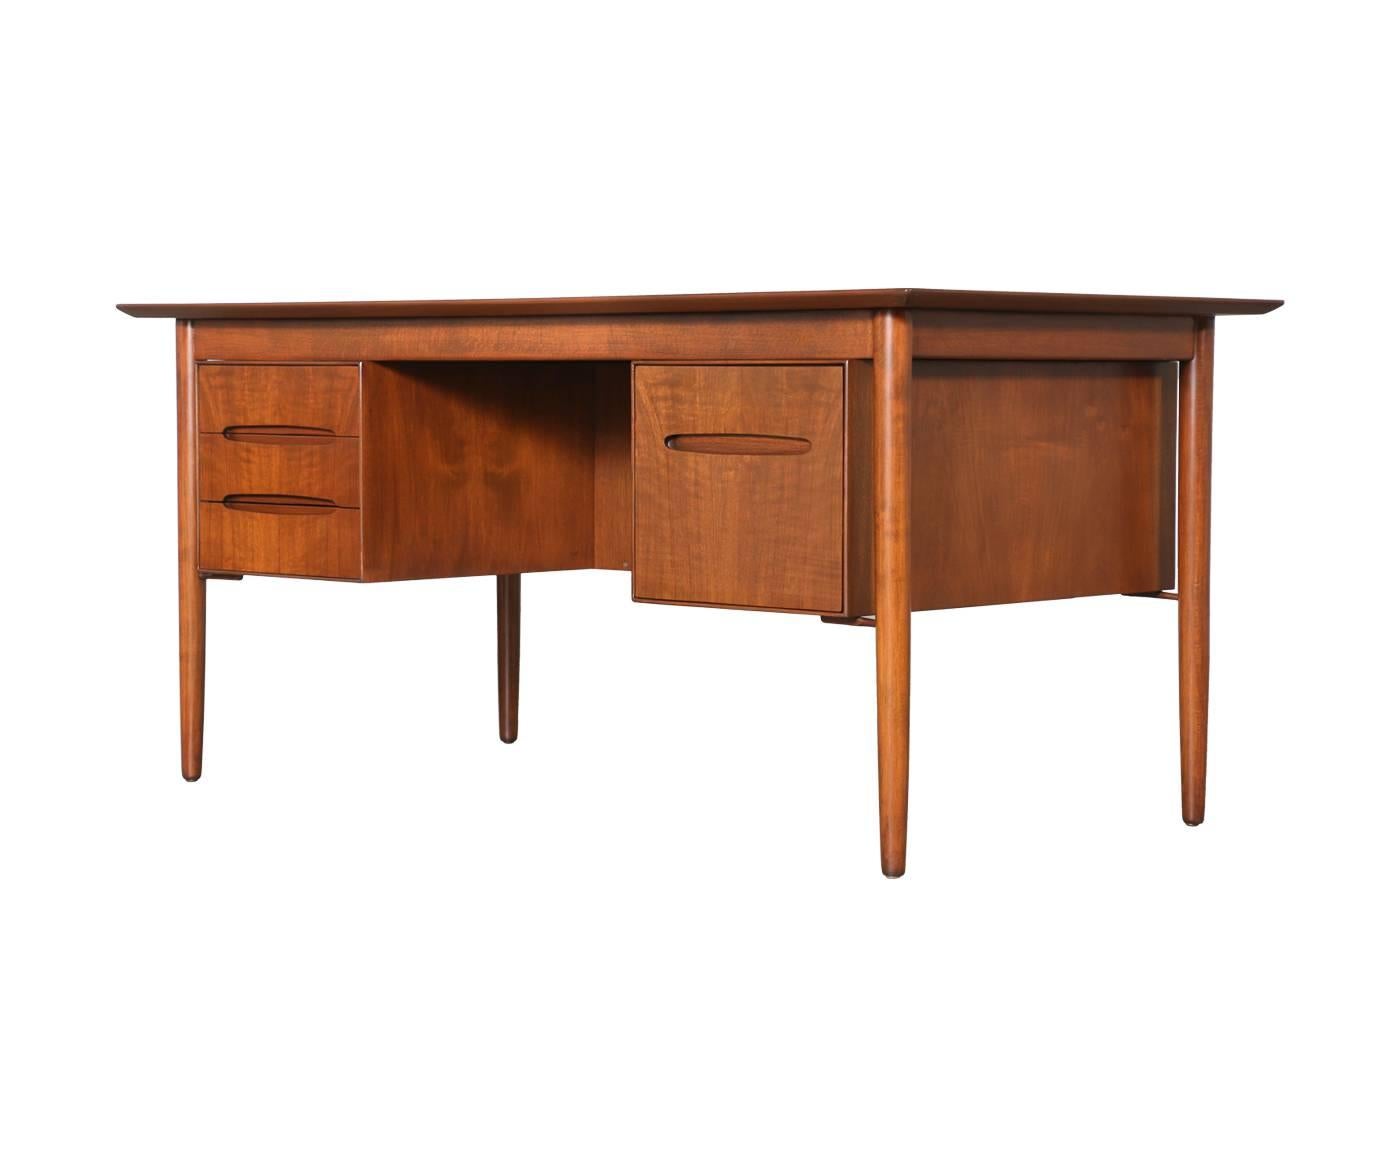 Designer: Unknown.
Manufacturer: Unknown.
Period/style: Danish modern.
Country: Denmark.
Date: 1950s.

Dimensions: 27″ H x 59″ W x 31.5″ D.
Materials: Walnut.
Condition: Excellent, newly refinished.
Number of items: 1.
Id number: 4443.